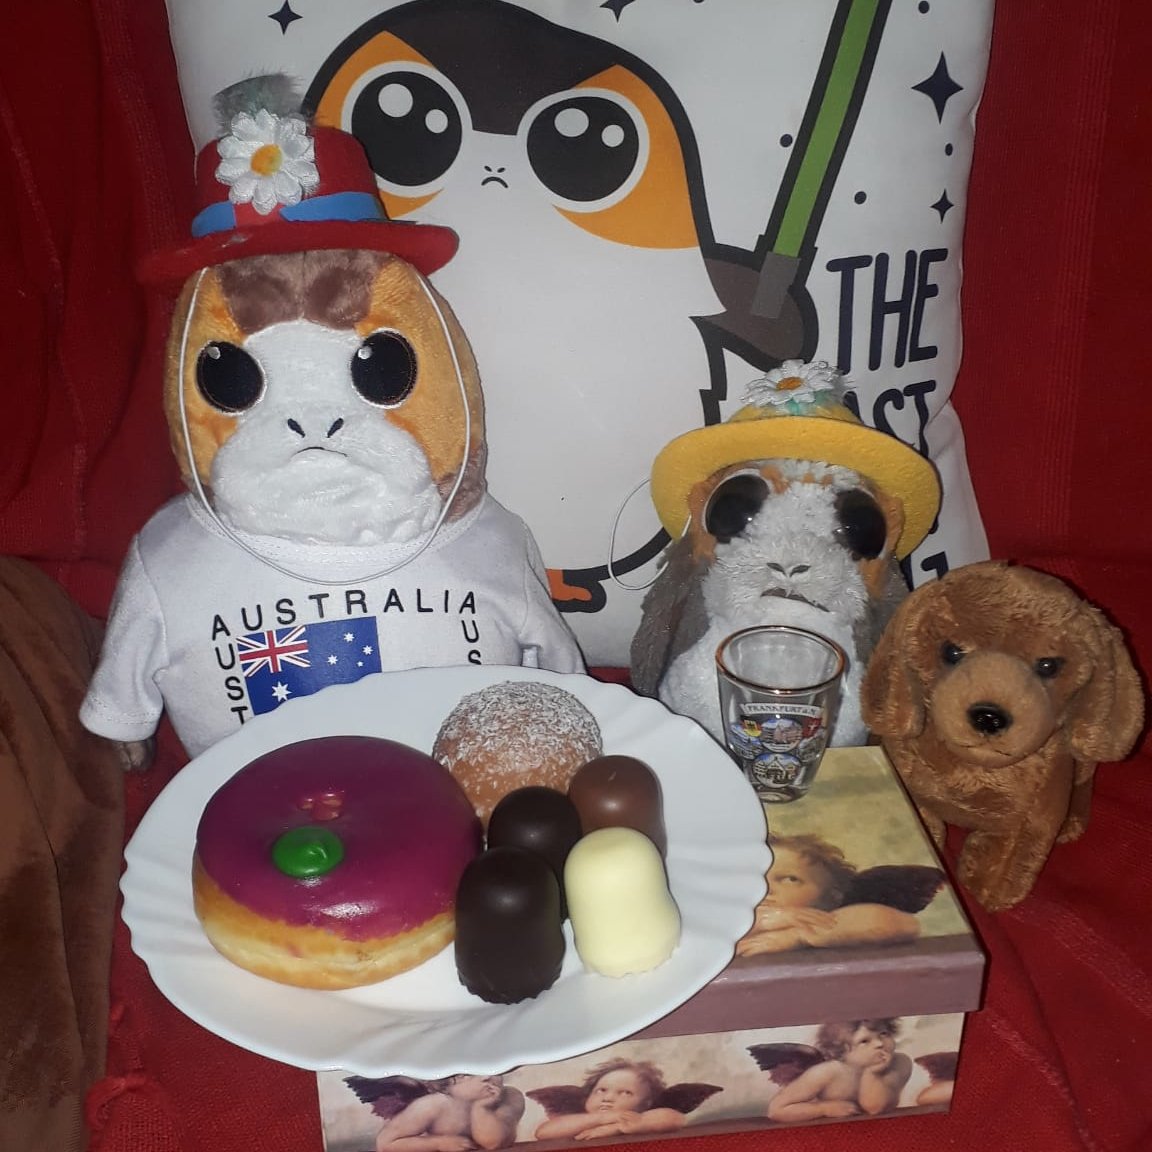 G'day, Bobby McQuarrie talking. We had Fasheengsdeensag last week and I was introduced to the German Carnival traditions - including the very tasty and rich Berliner doughnuts. Bert showed me all the fun stuff about the so-called 'fifth season'. 😁 #porg #porgs #PorgeanEmpire